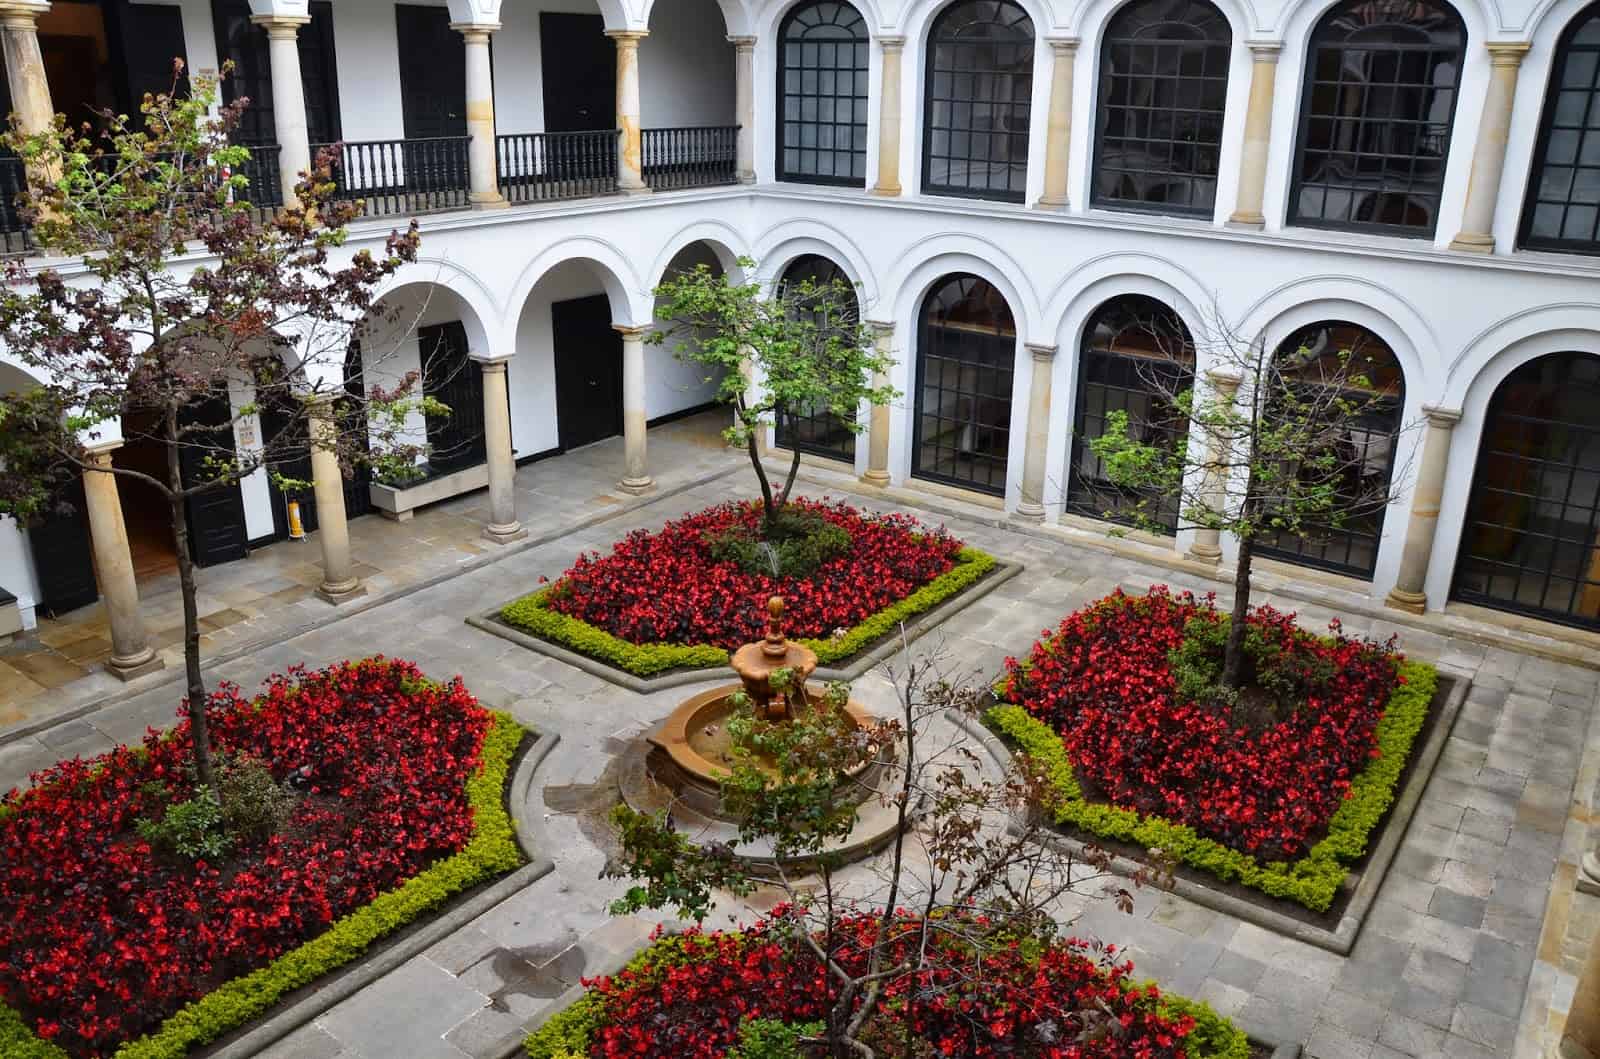 Courtyard of the Botero Museum in Bogotá, Colombia